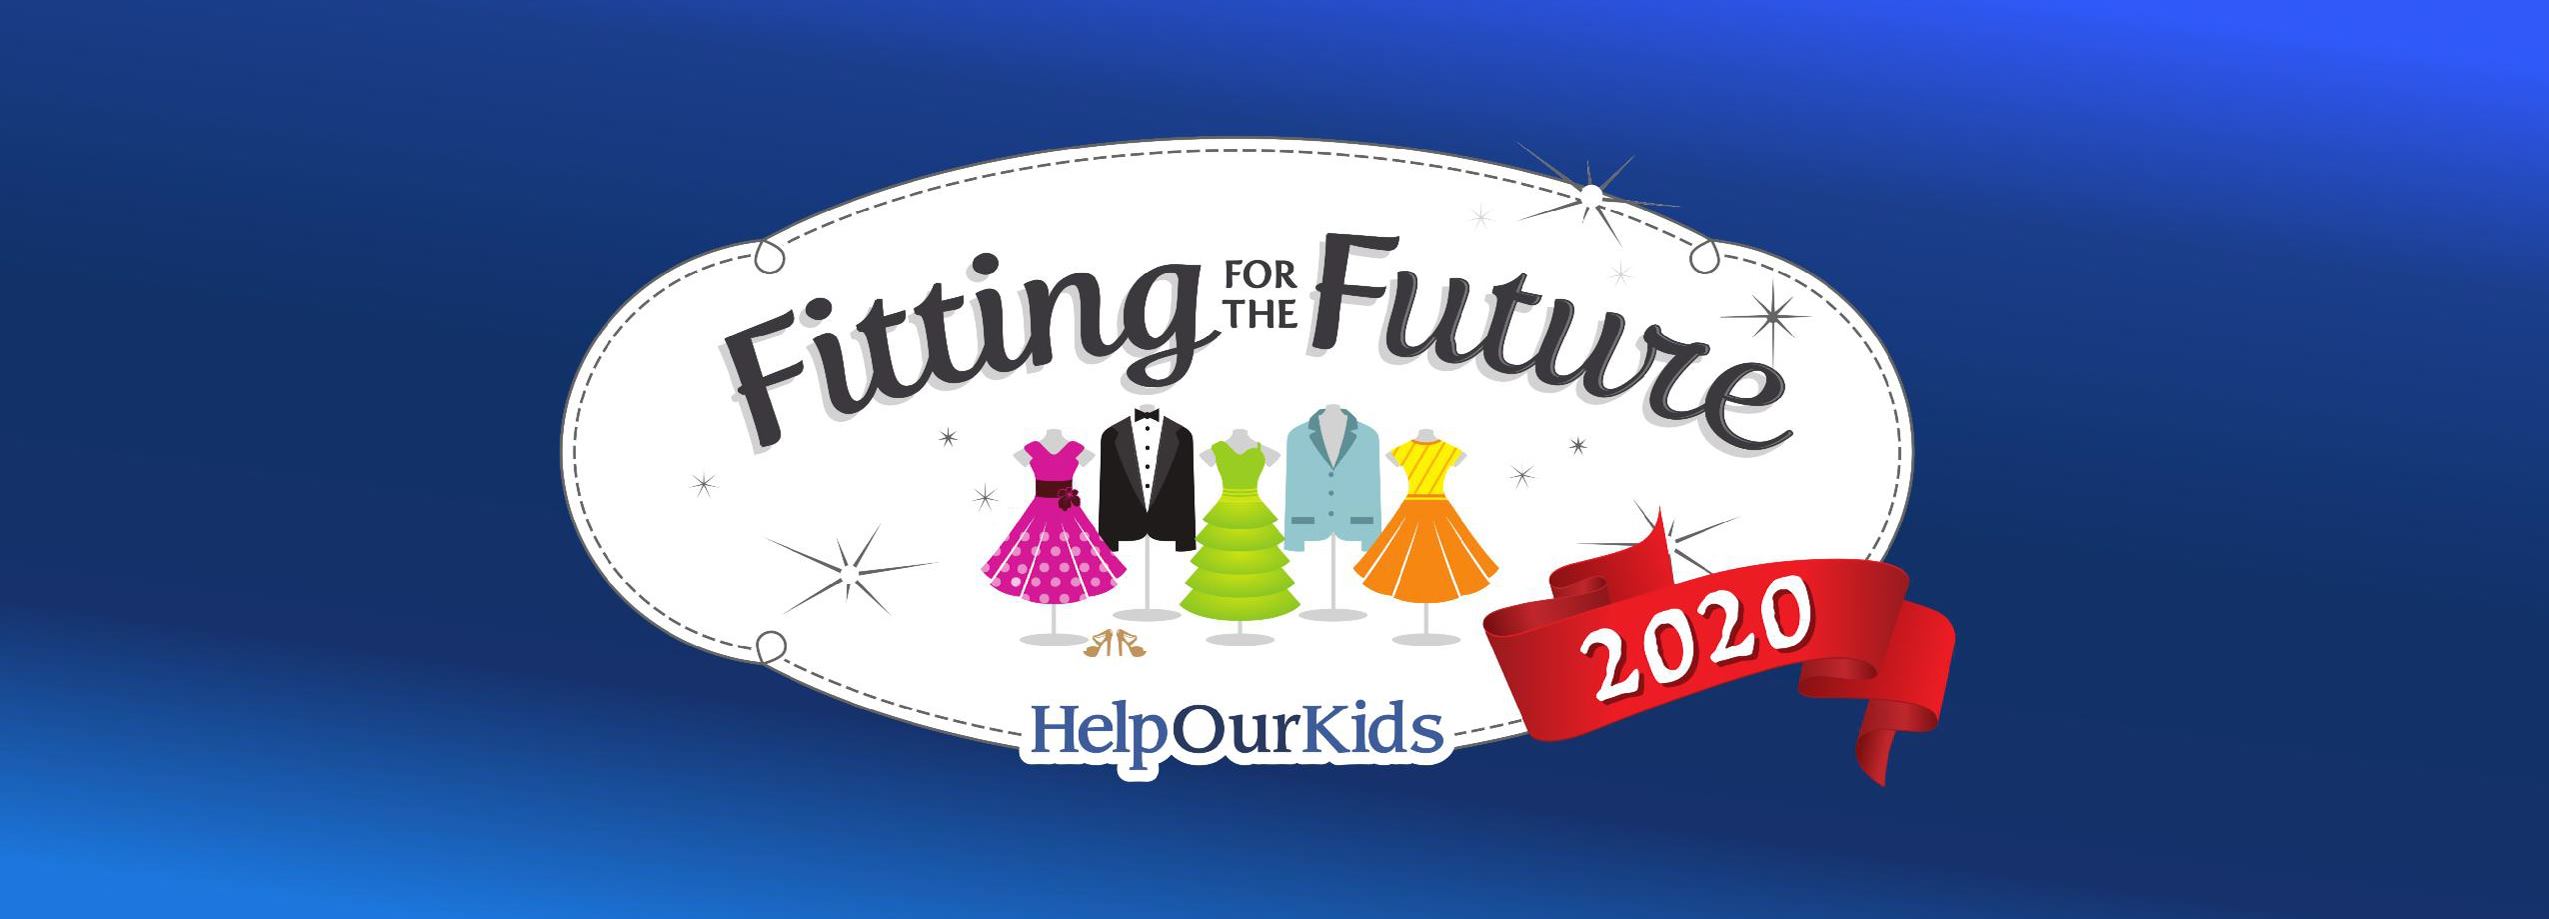 Fitting for the Future Donate New and Gently Used